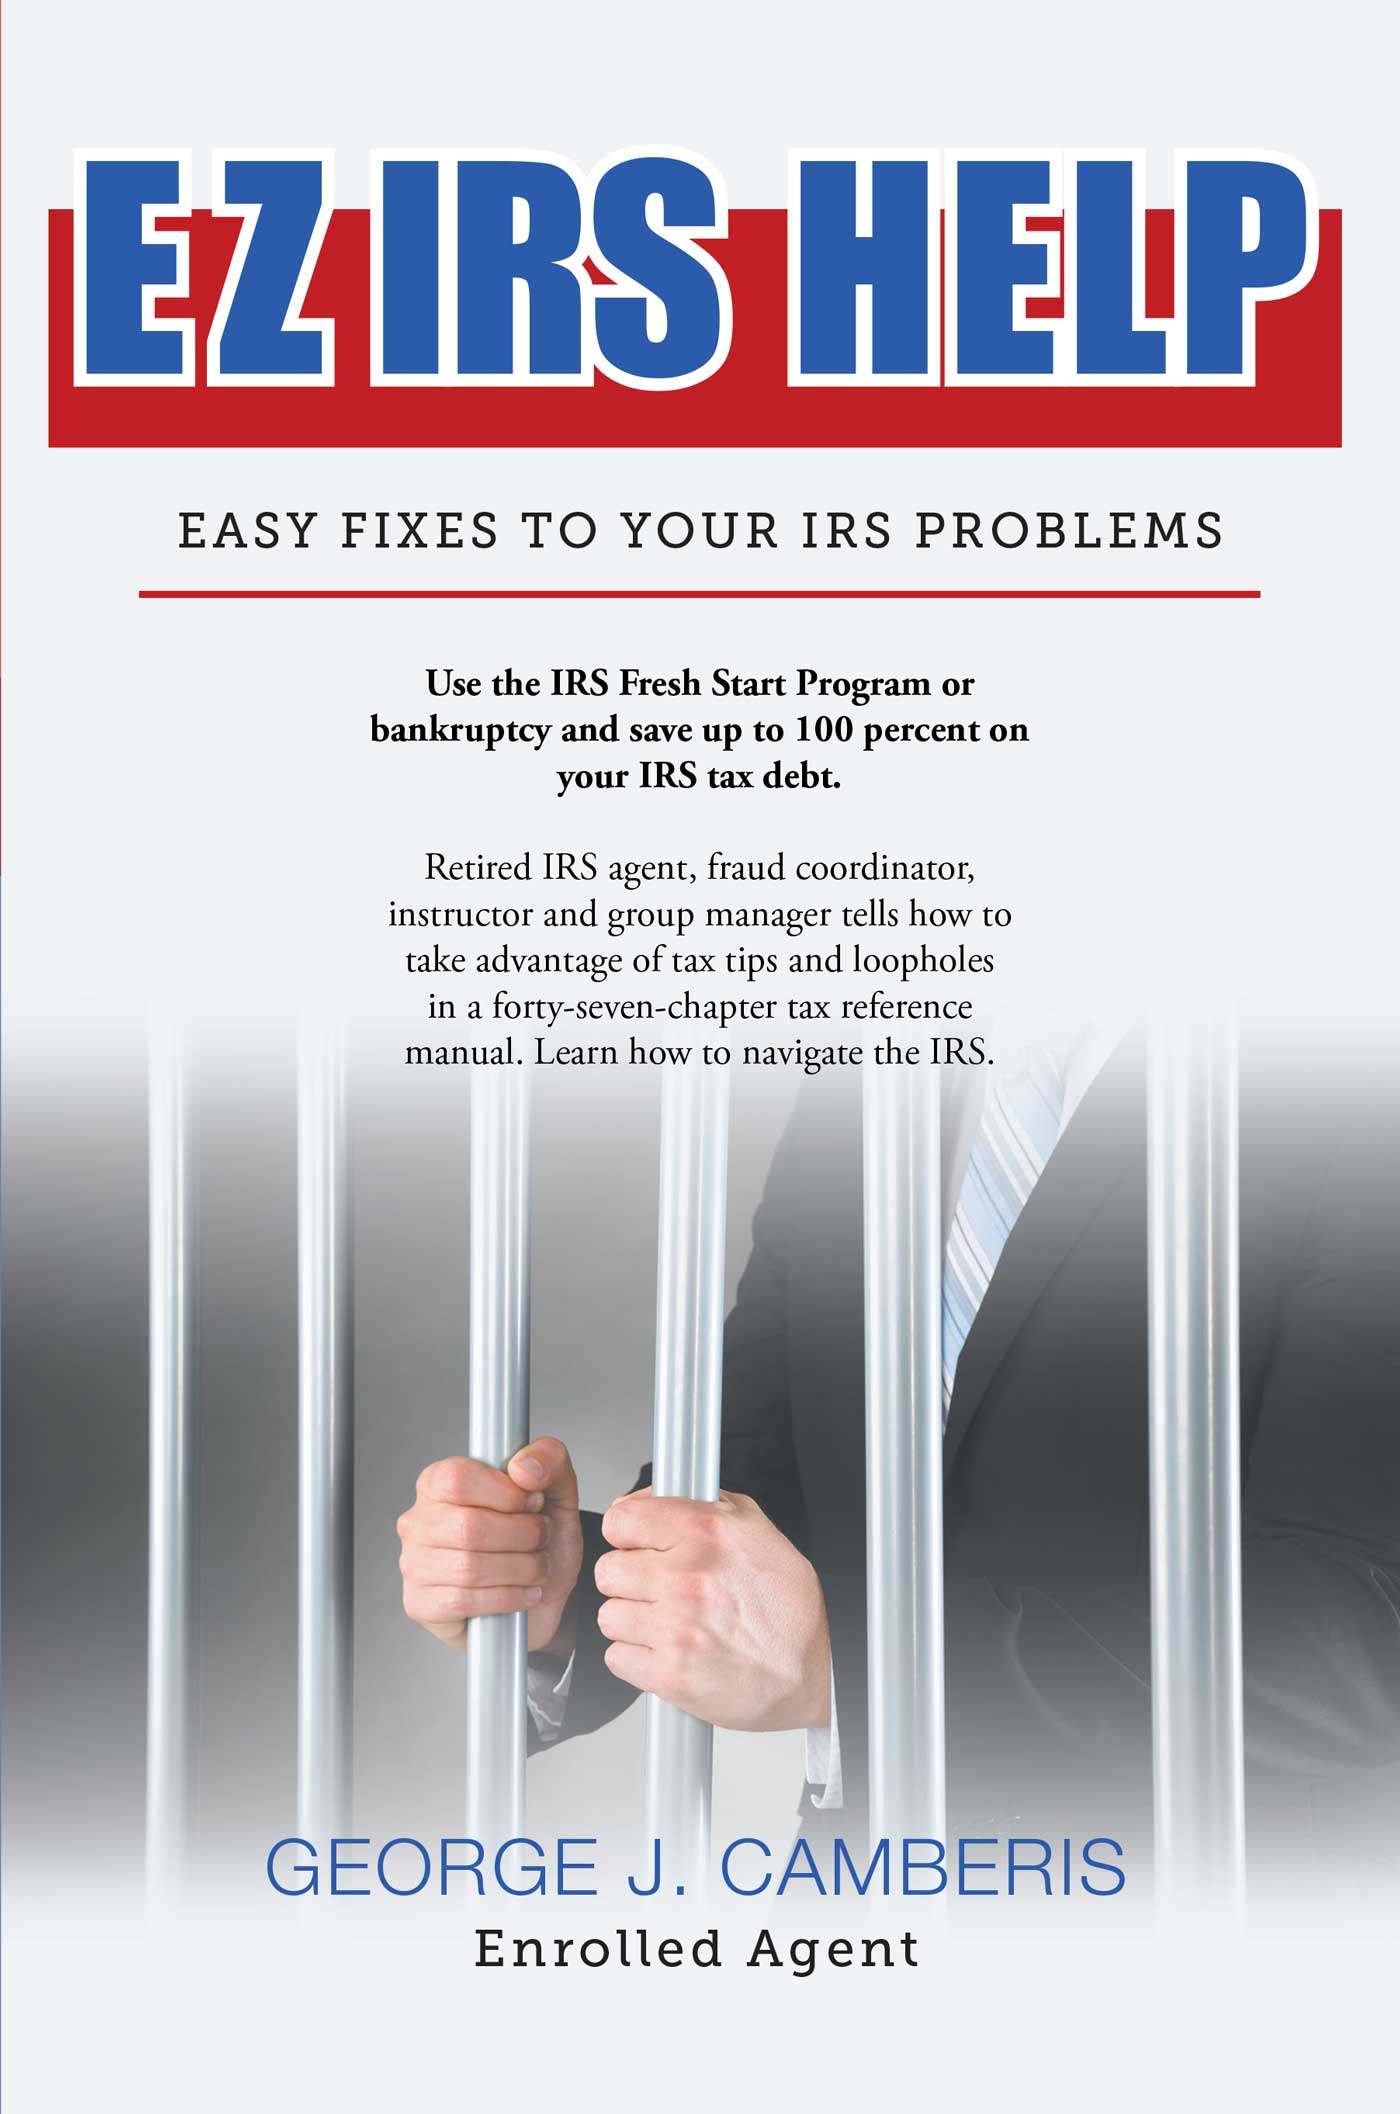 EZ IRS HELP Cover Image